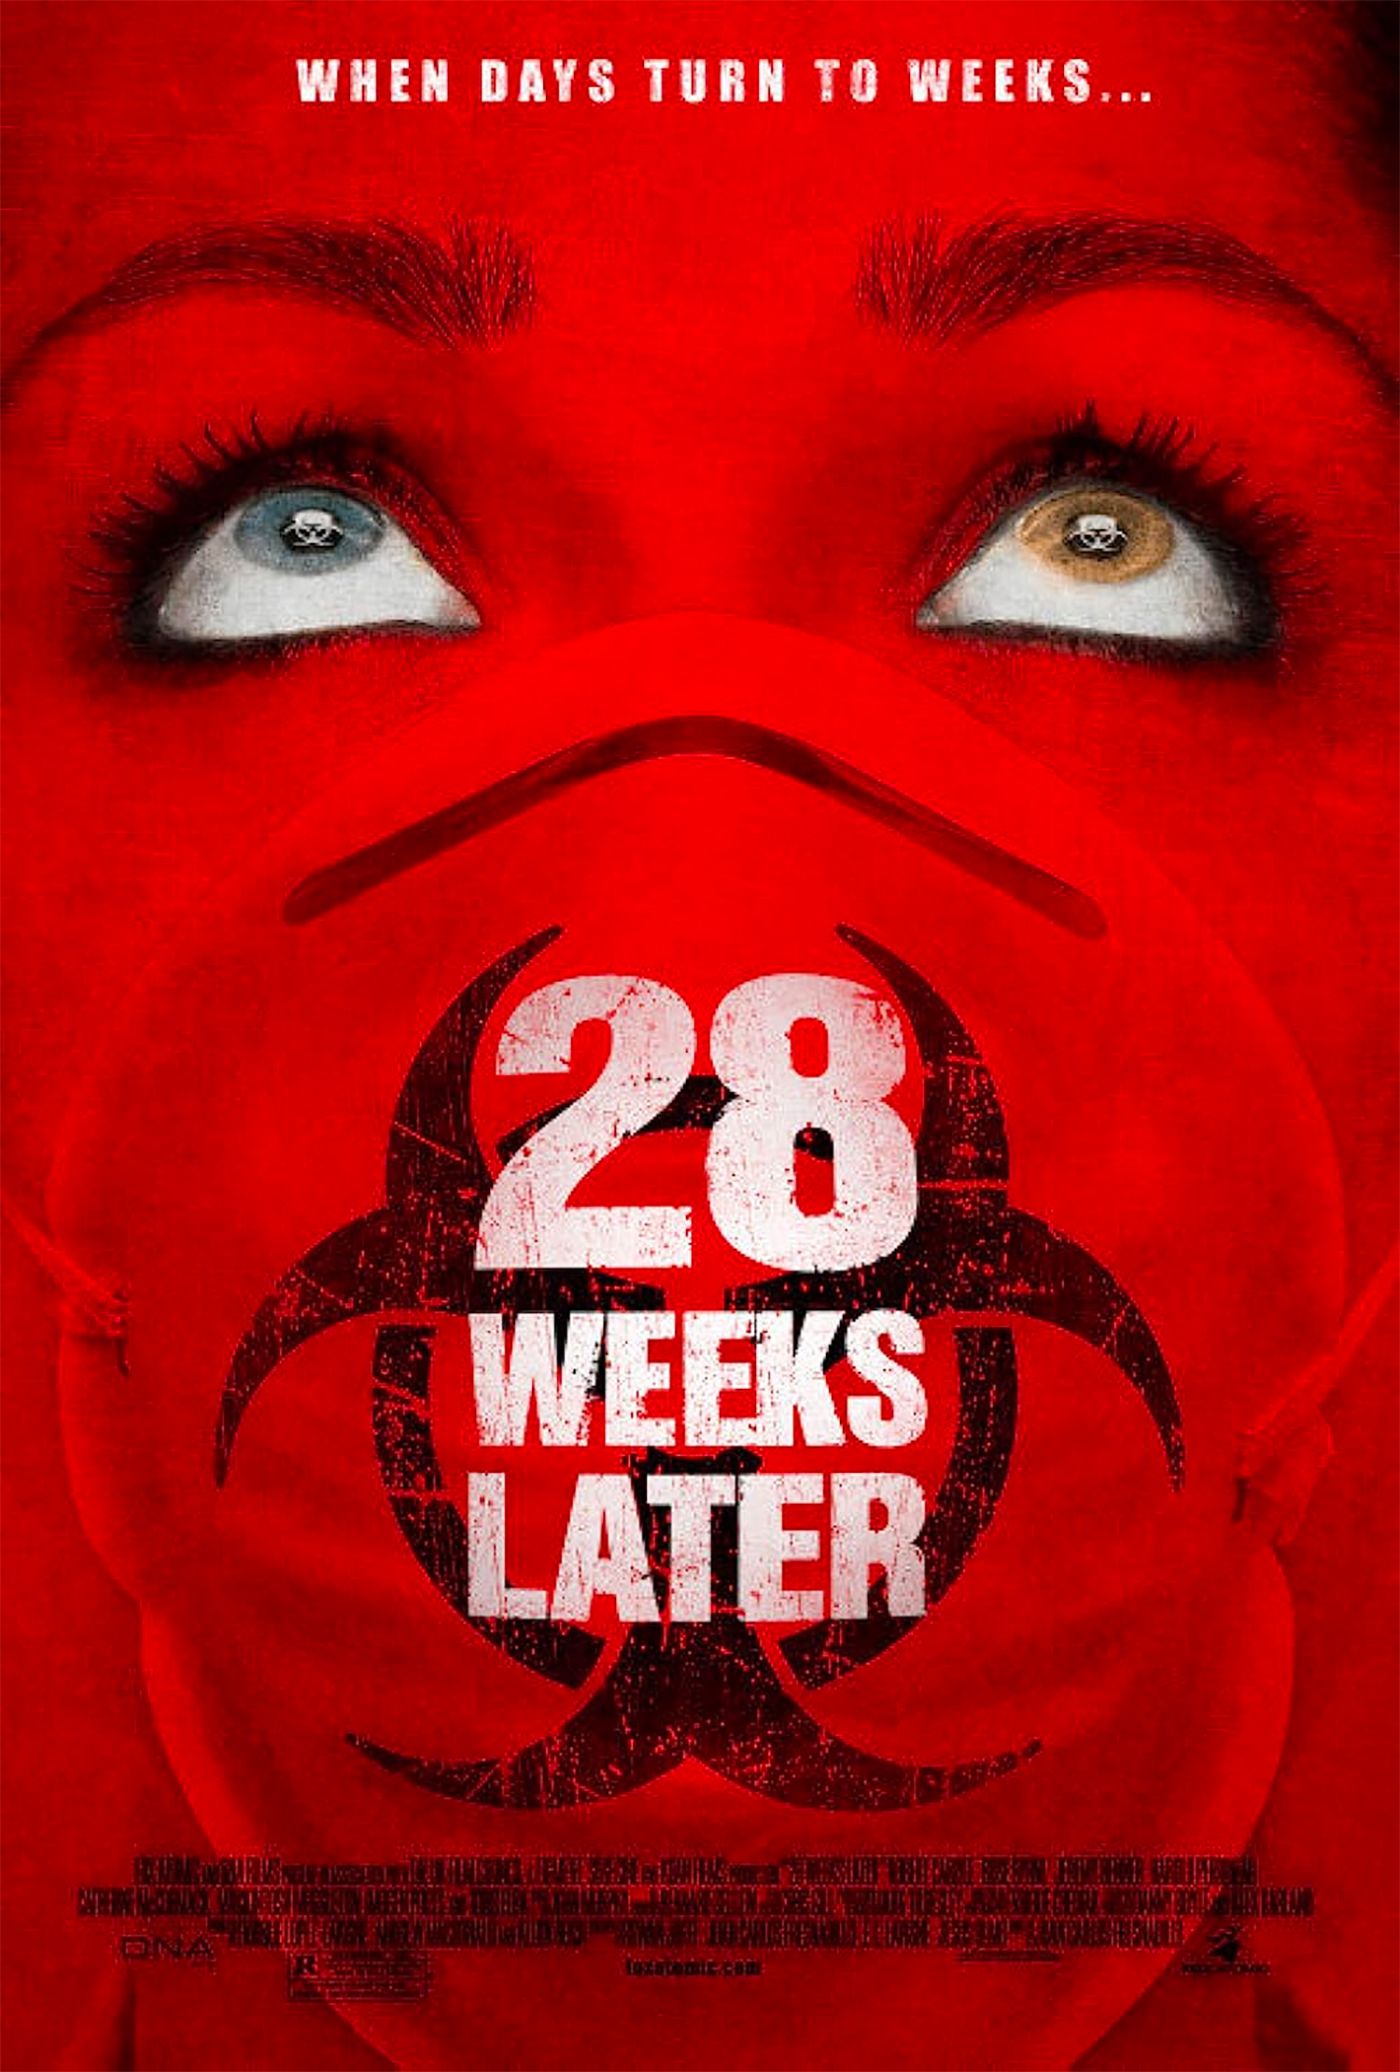 28 Weeks Later poster